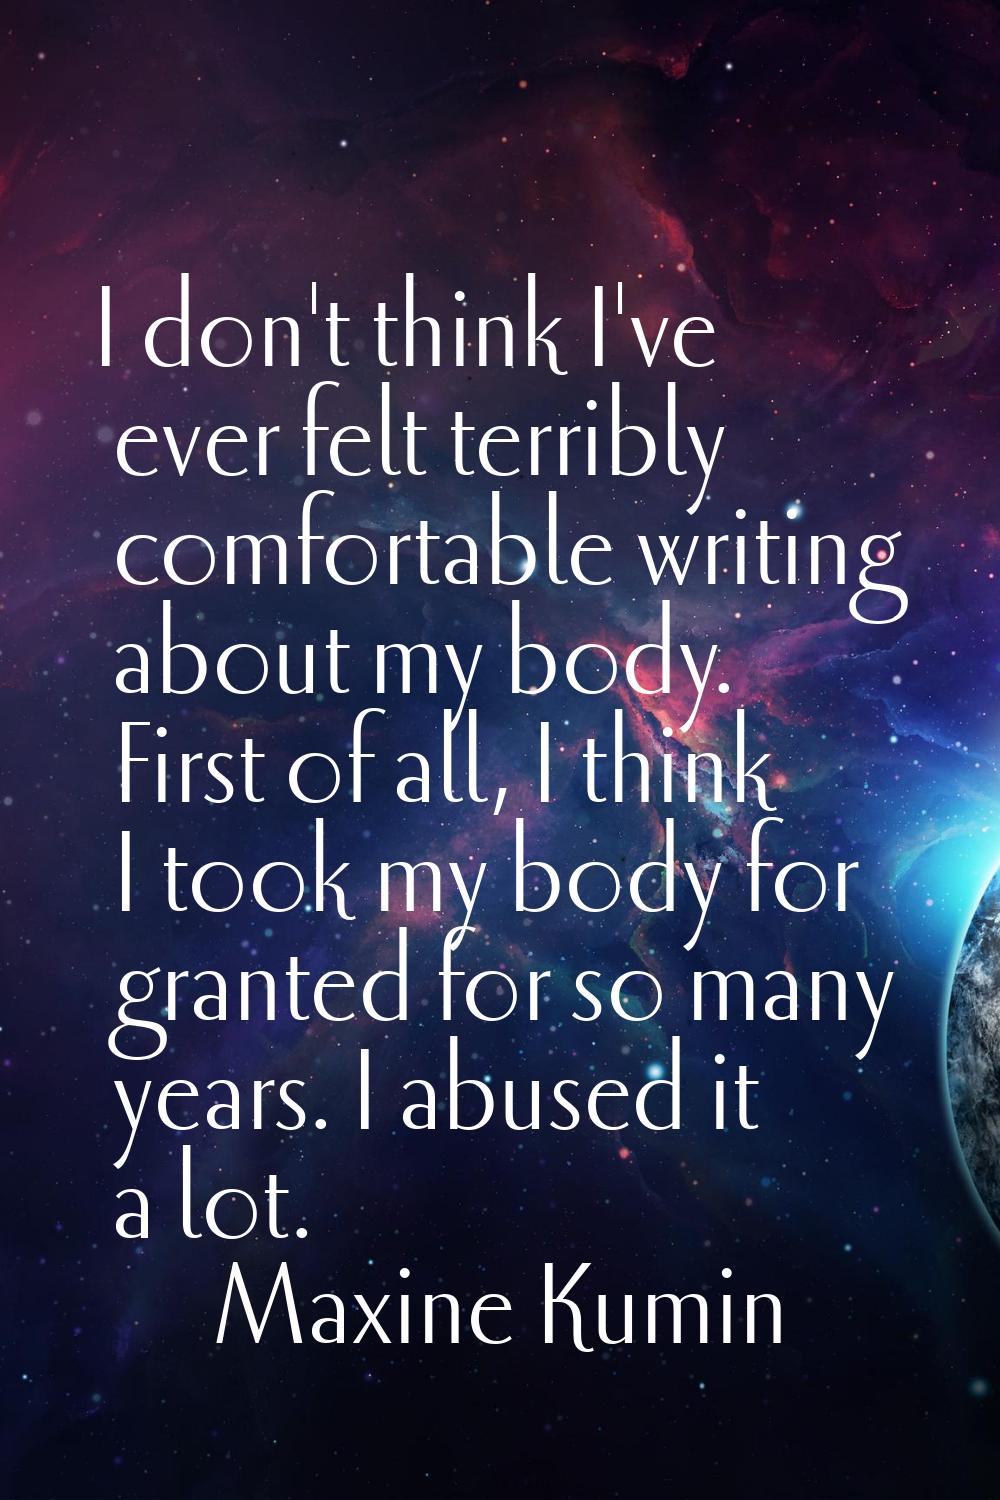 I don't think I've ever felt terribly comfortable writing about my body. First of all, I think I to